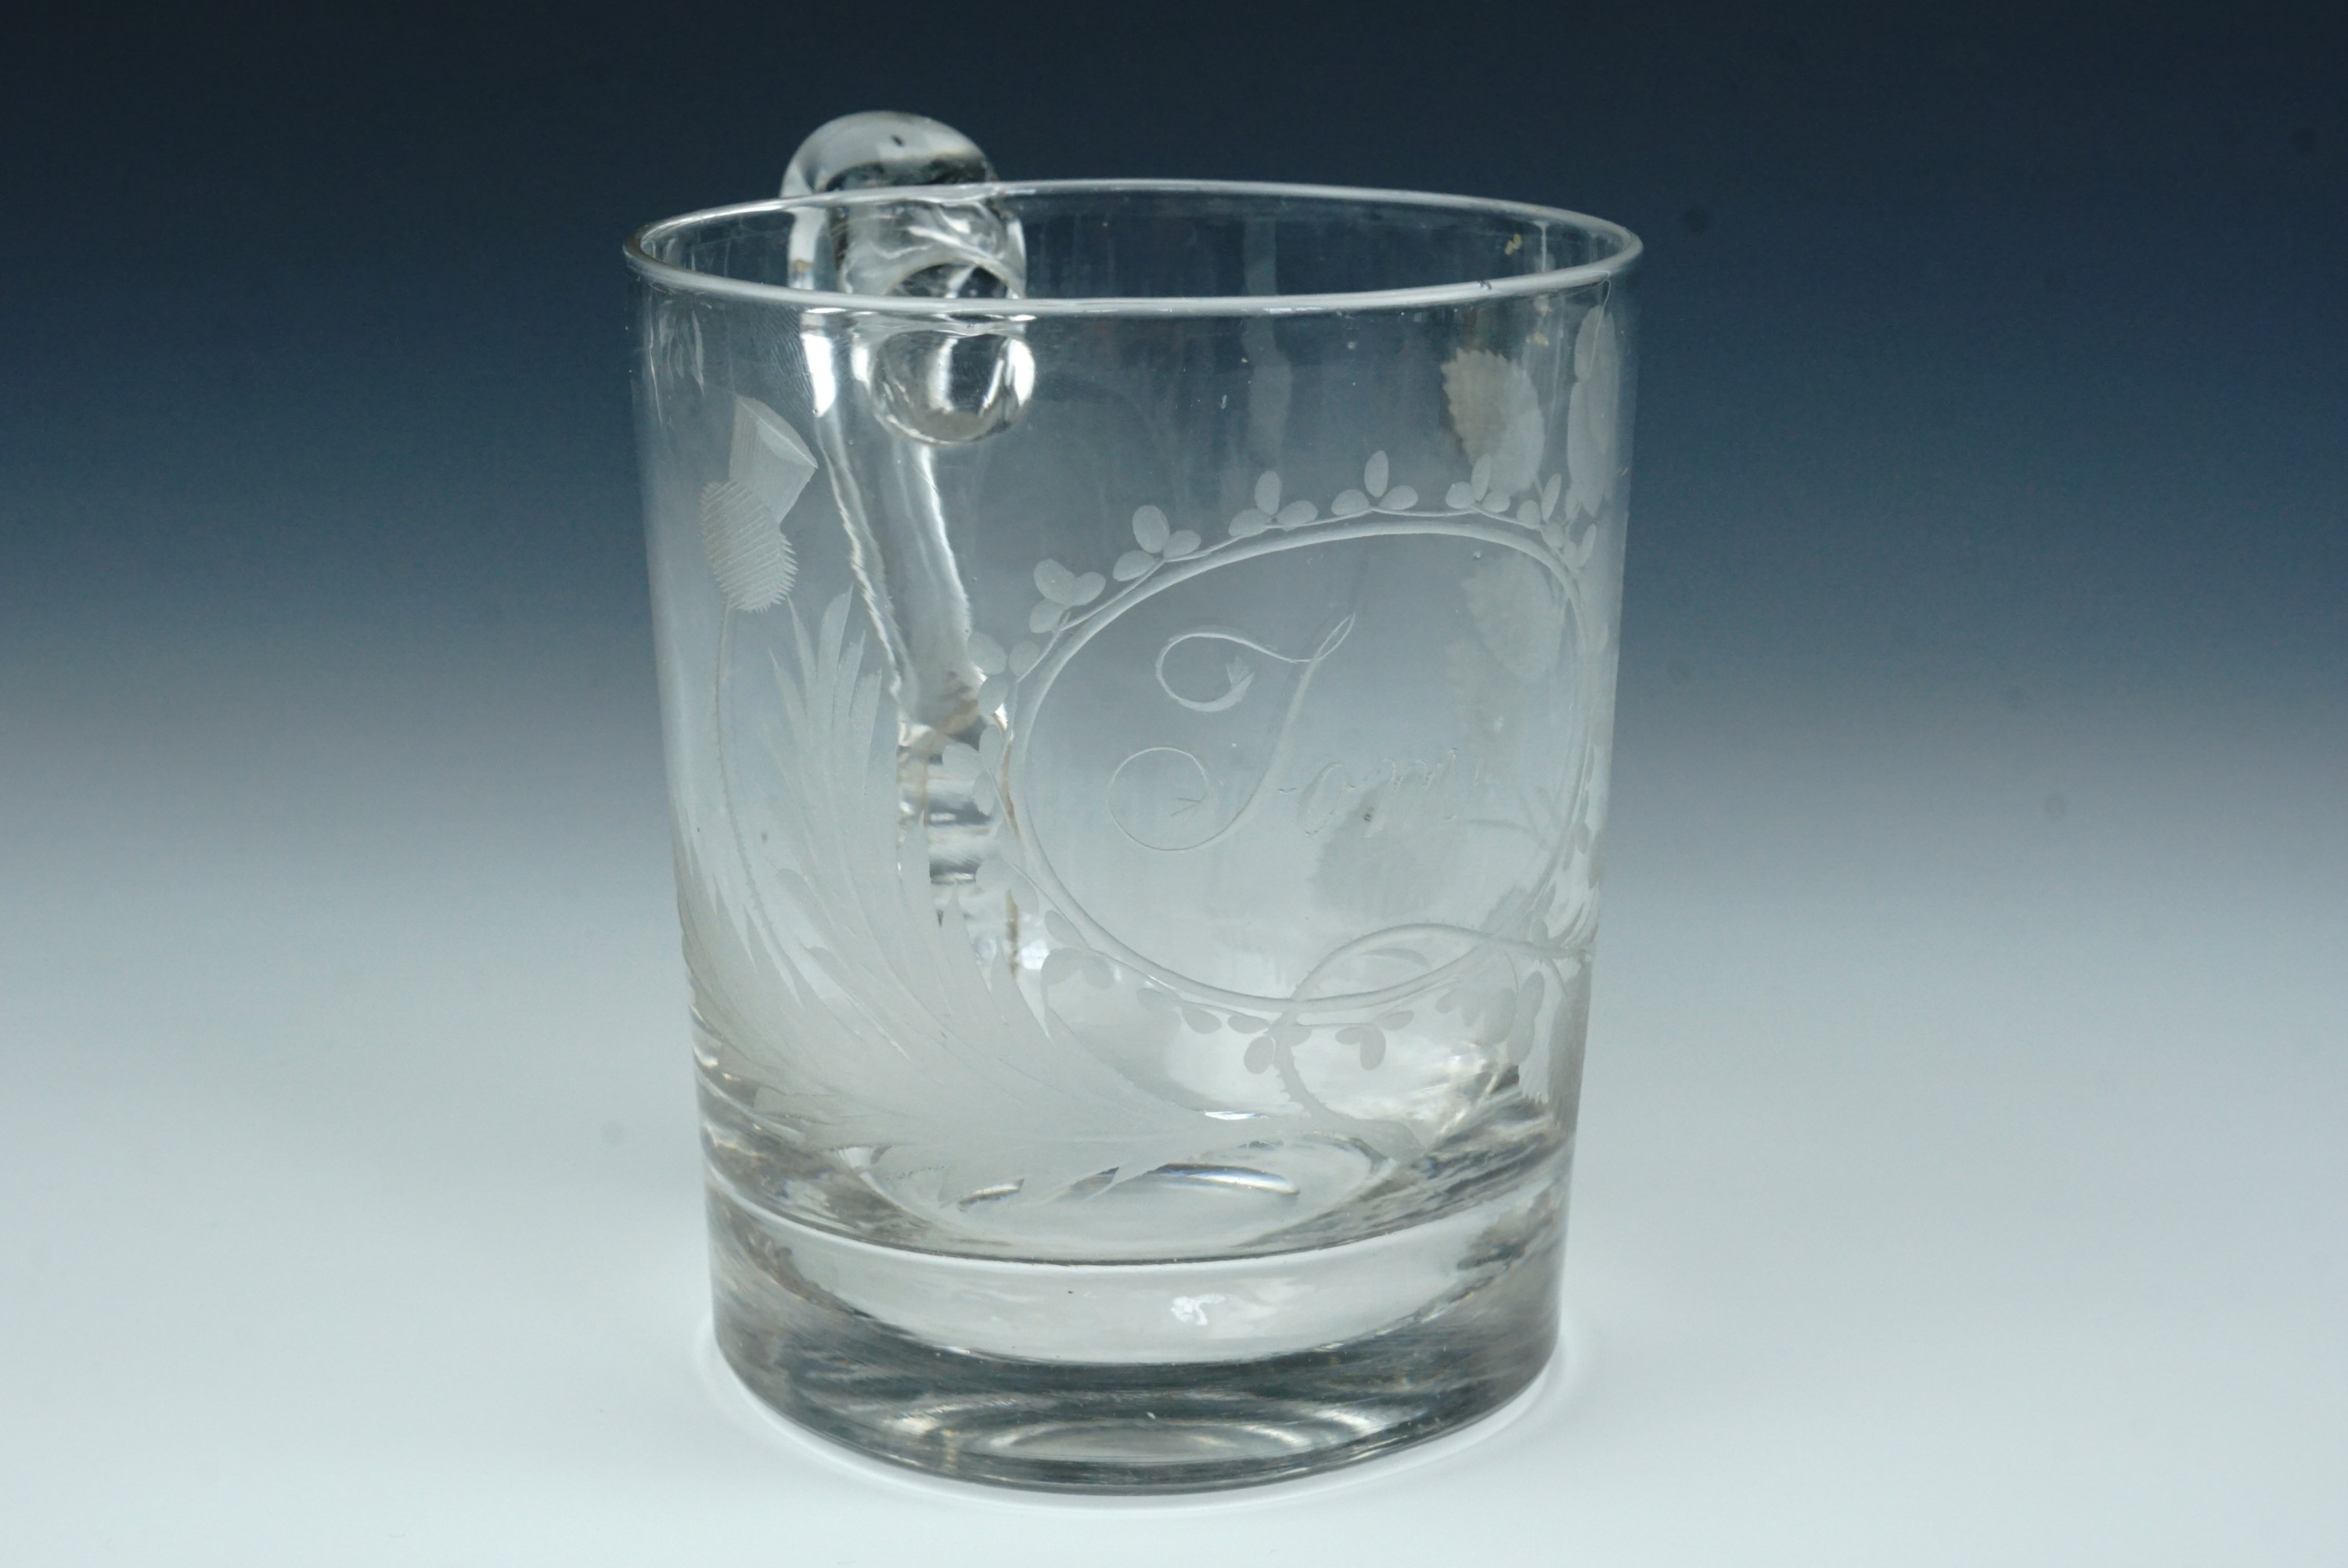 An early 19th Century glass Christening cup, wheel-cut with the name "Tom" within a floral - Image 3 of 6